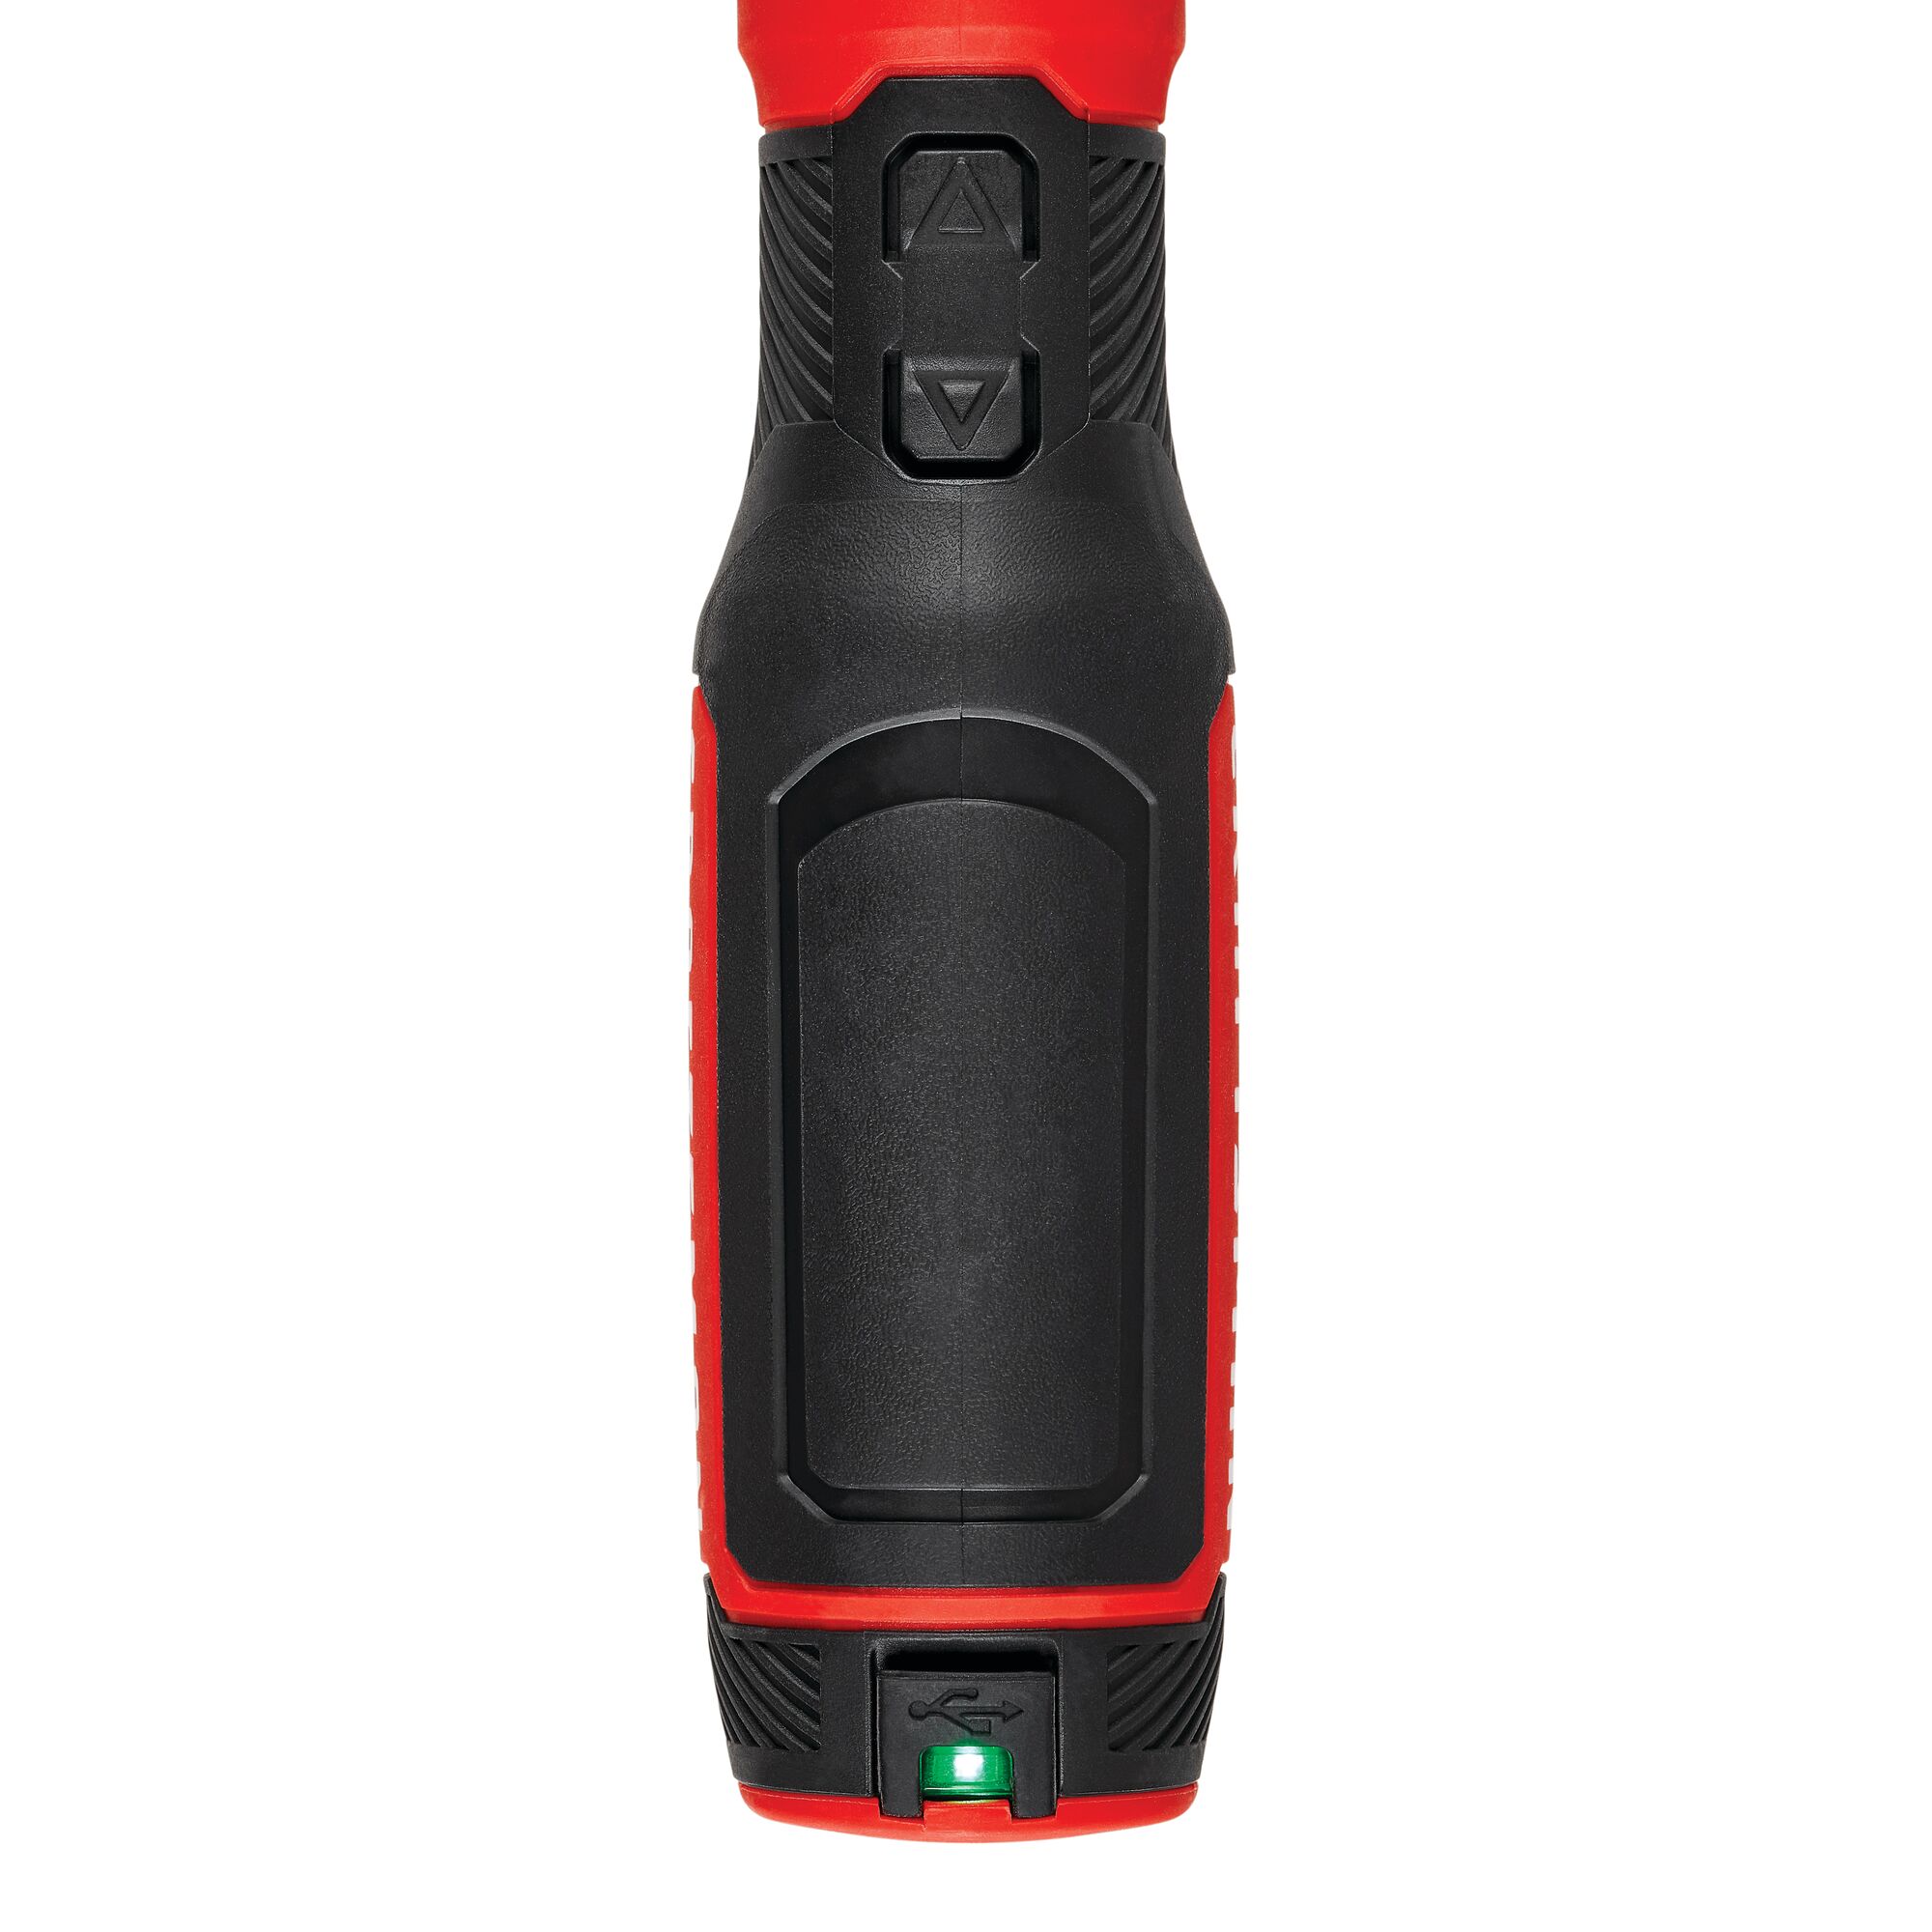 Automatic L E D activation when in use feature of 4 volts Max Cordless ScrewDriver.